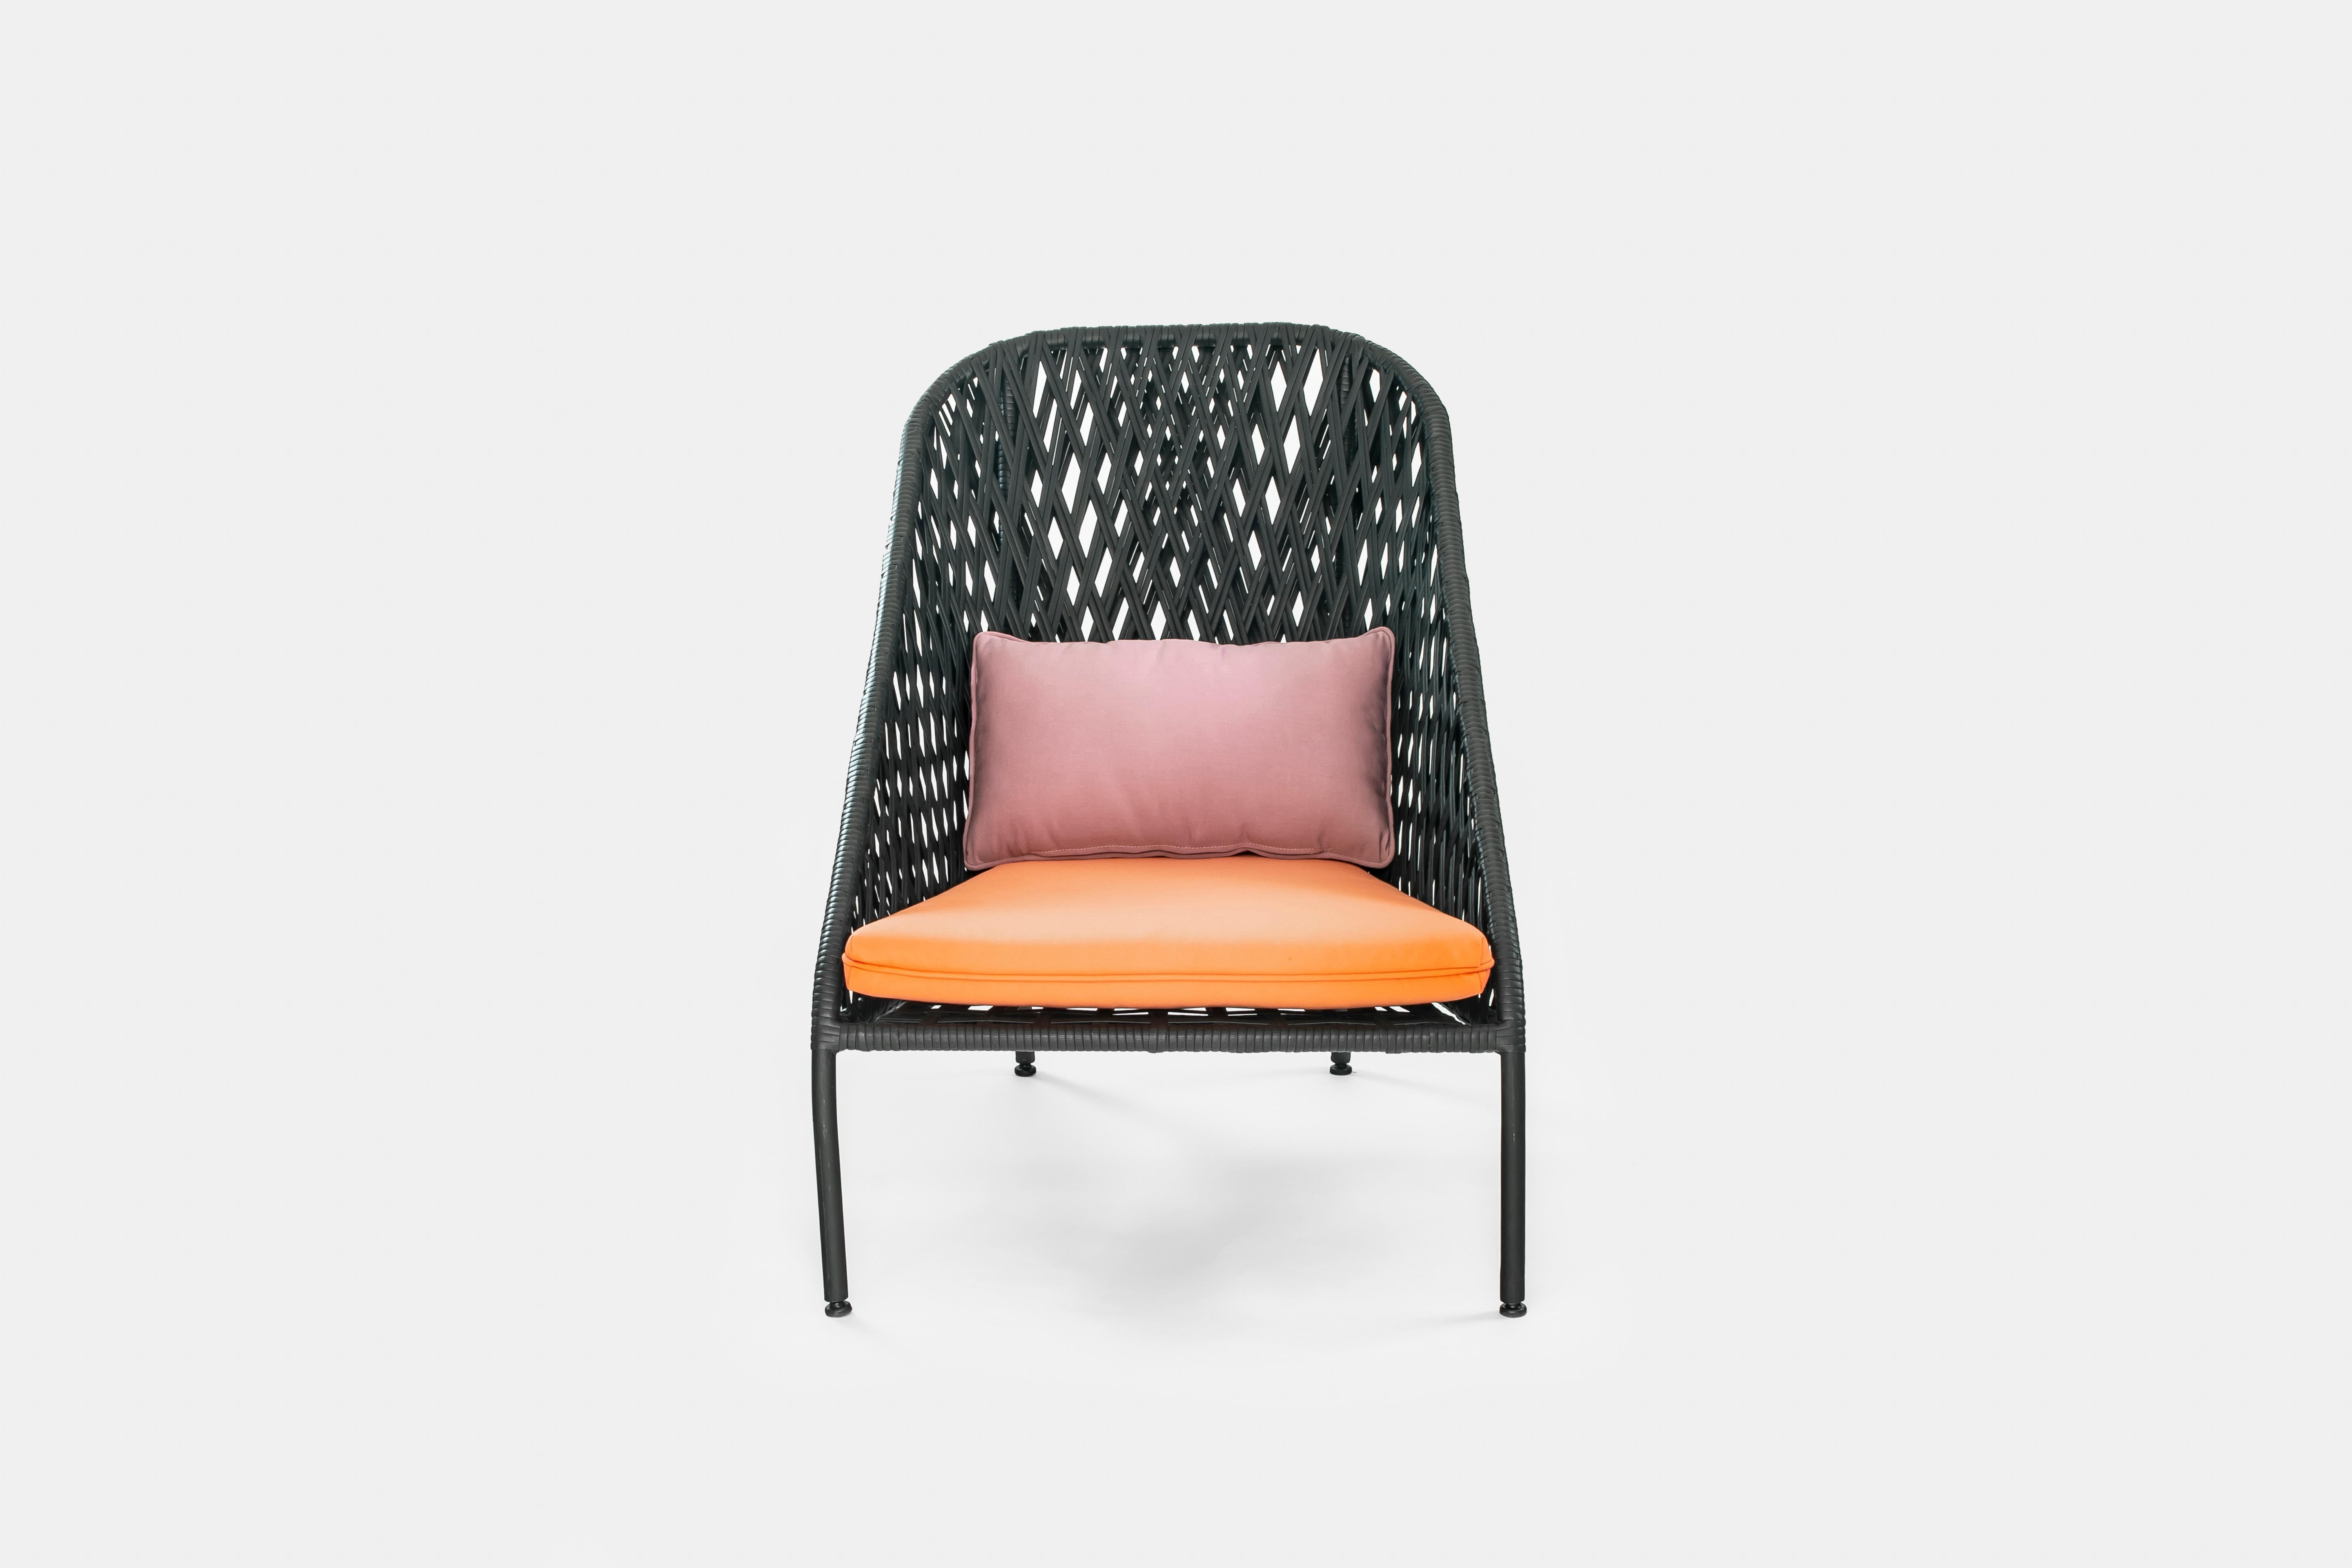 A spacious and low lounge chair perfect for resting and relaxing. Combines synthetic weaving technique with an aluminum light structure perfect for outdoor living.

“Tumbona” is total comfort. The lounge chair's concave shape embraces you